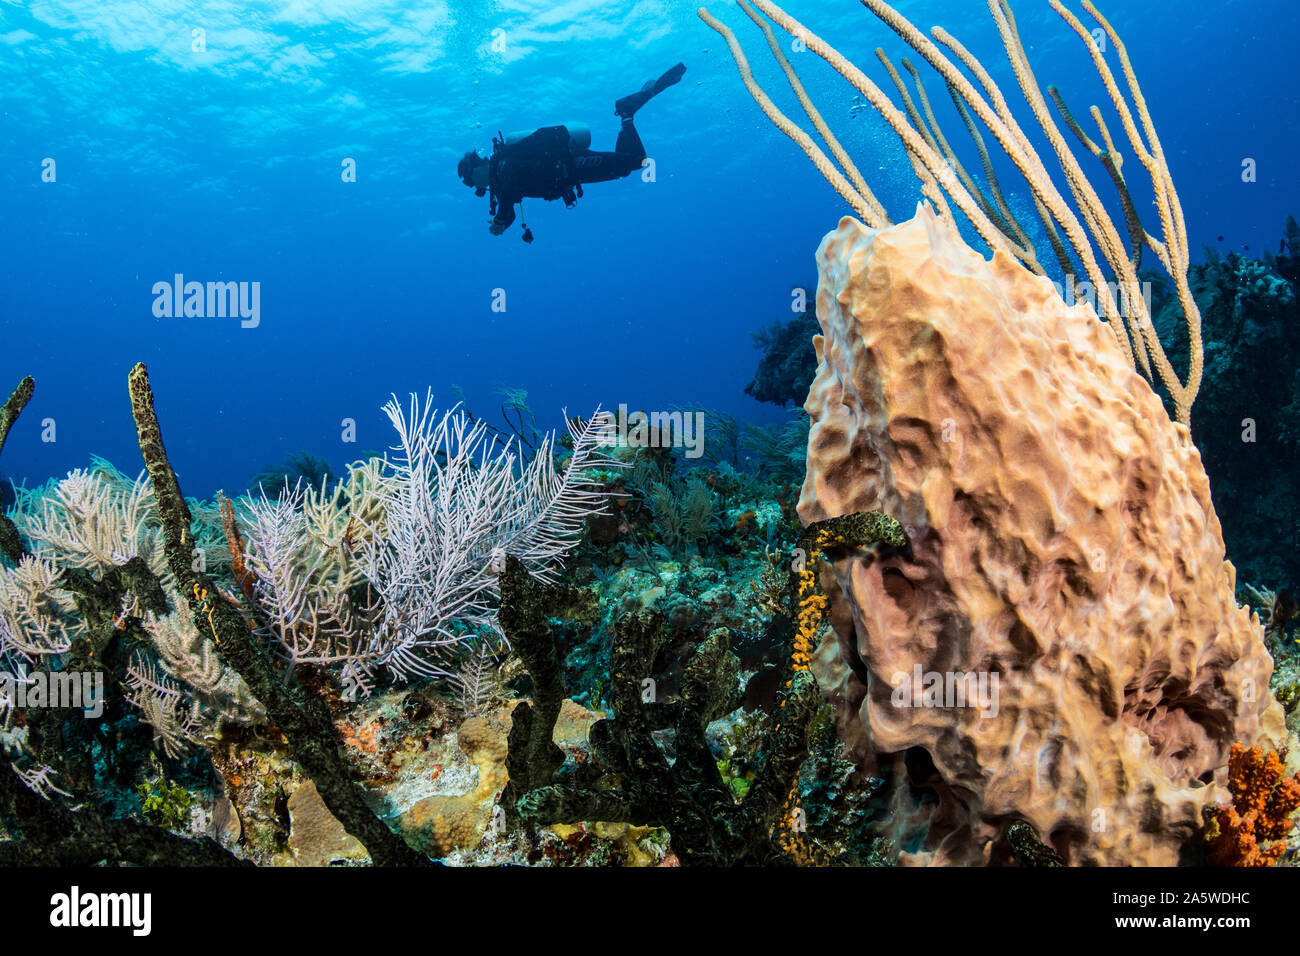 A scuba divers swims over a vibrant coral reef in the Caribbean of Bimini, Bahamas. Stock Photo